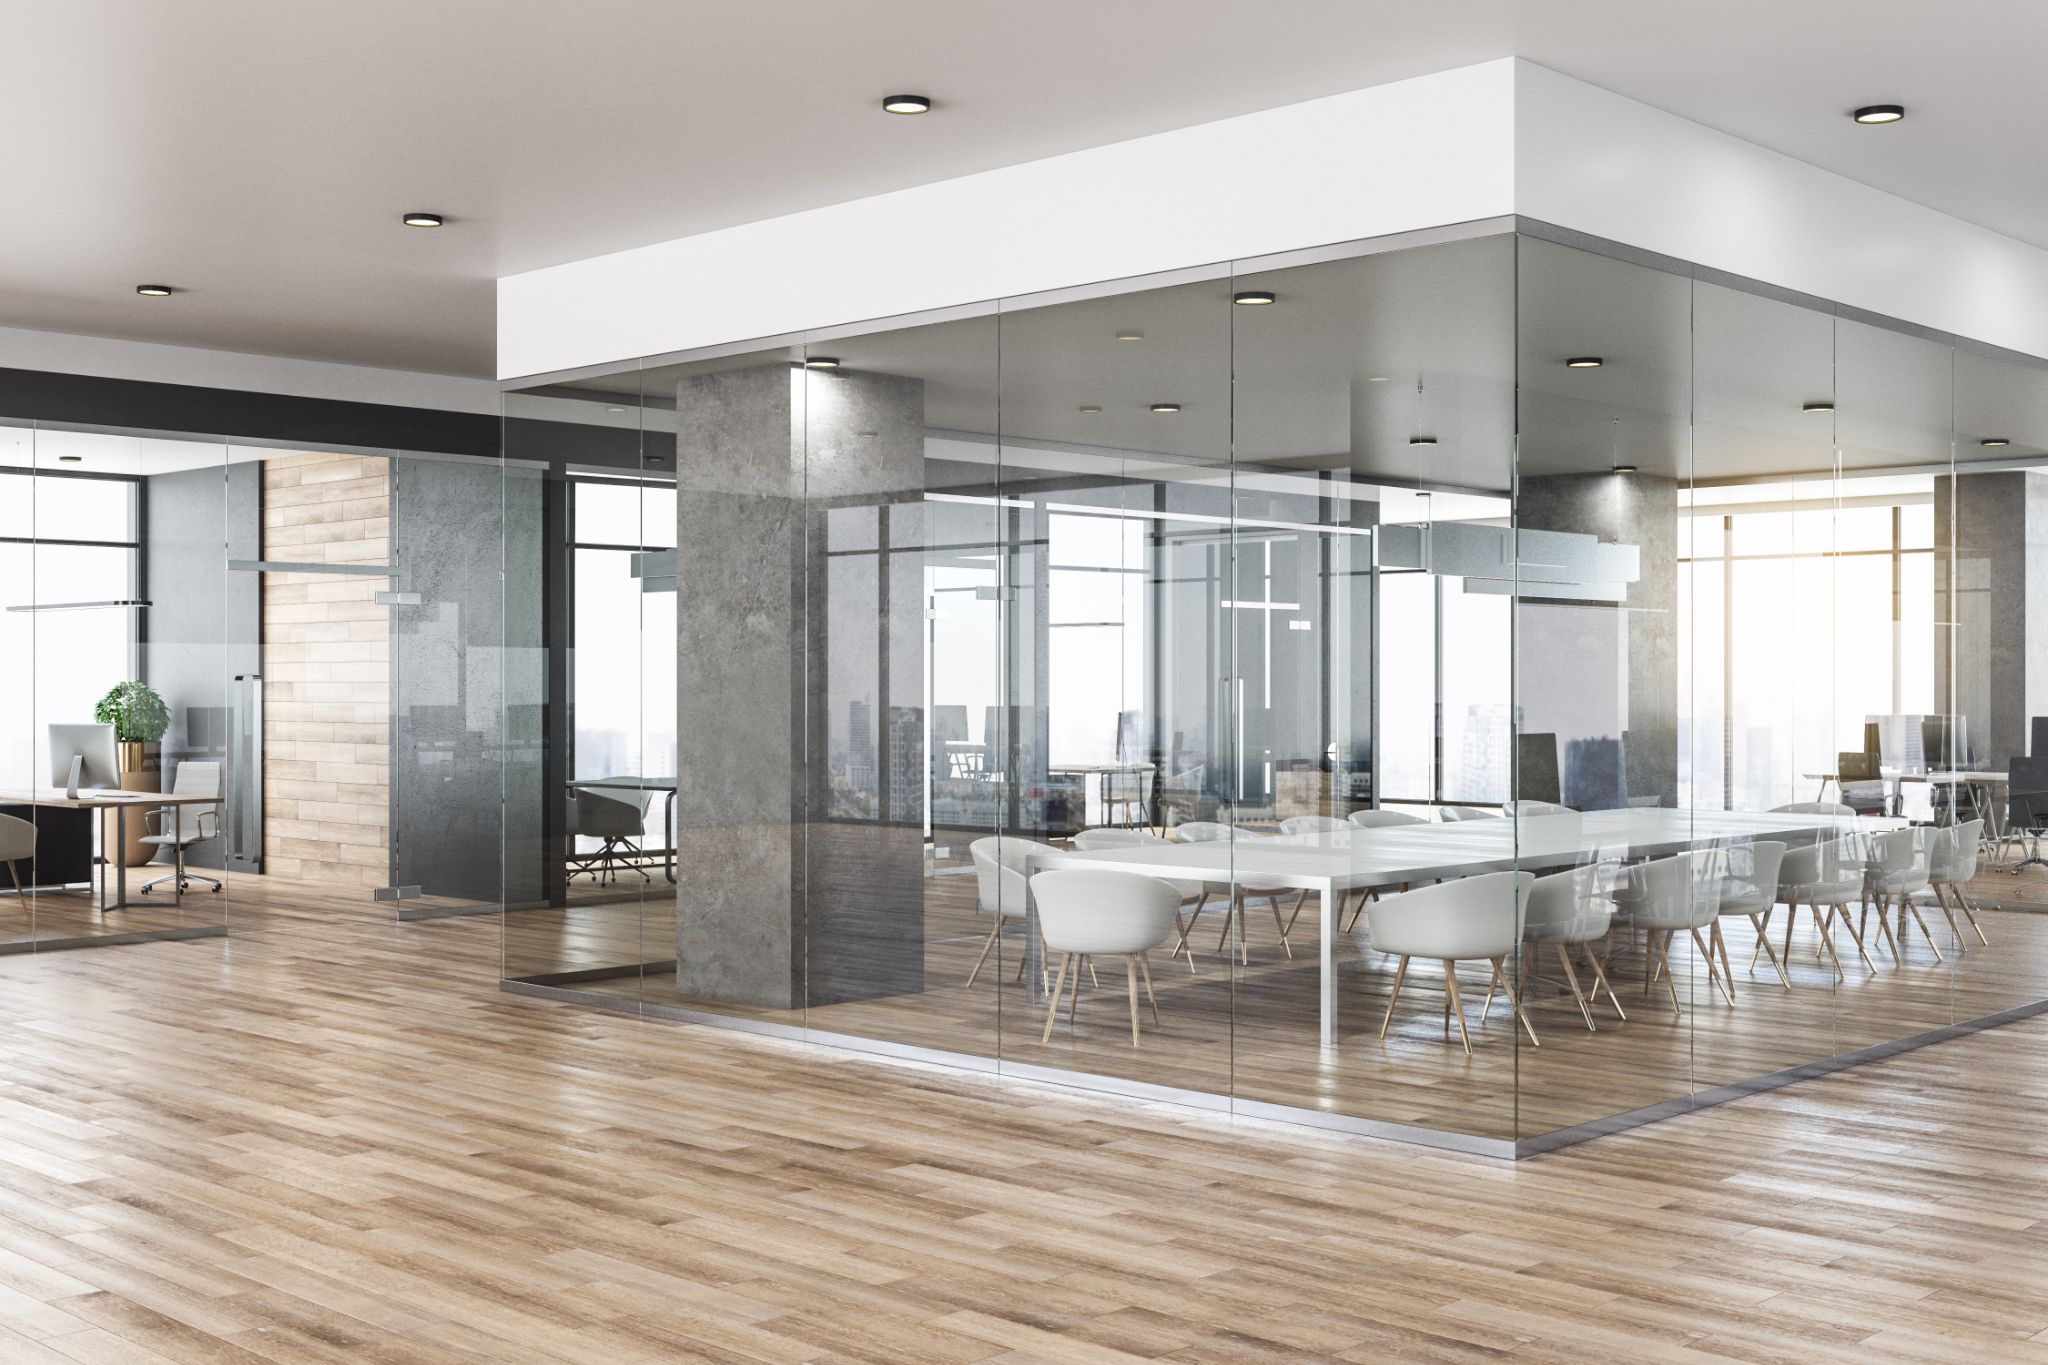 New glass concrete office interior with city view